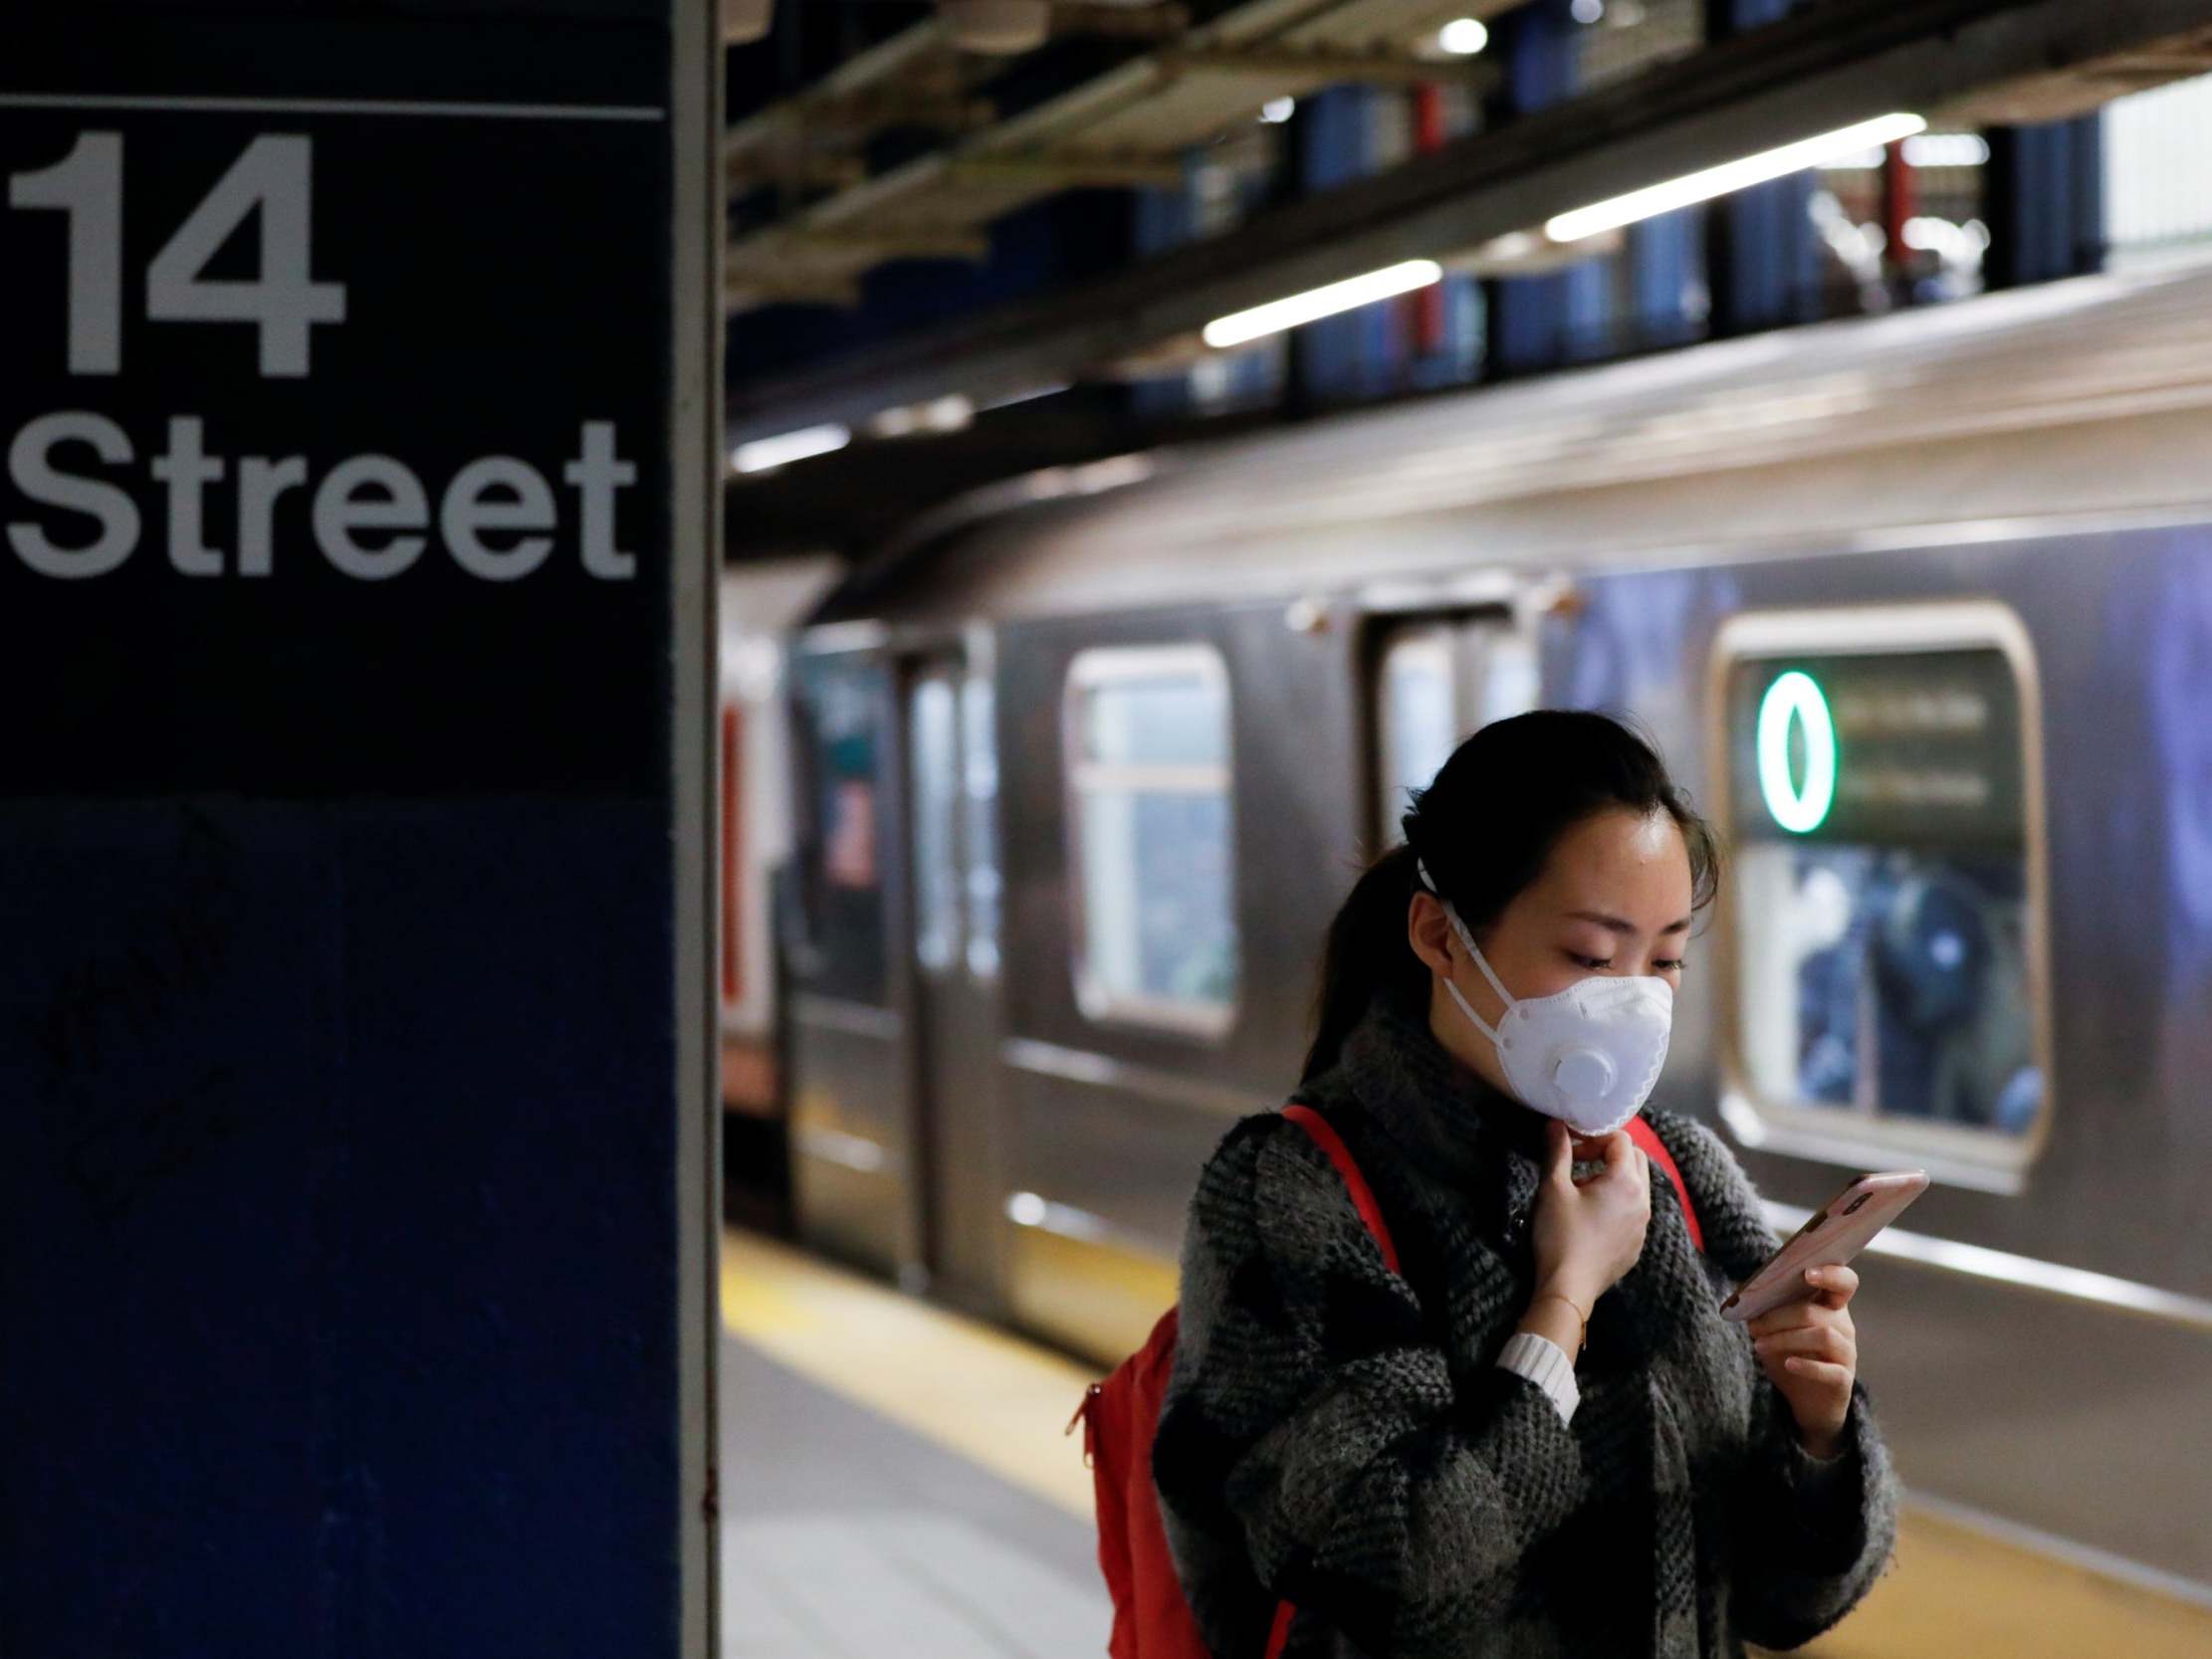 Masks were required on the New York subway system during the Covid crisis